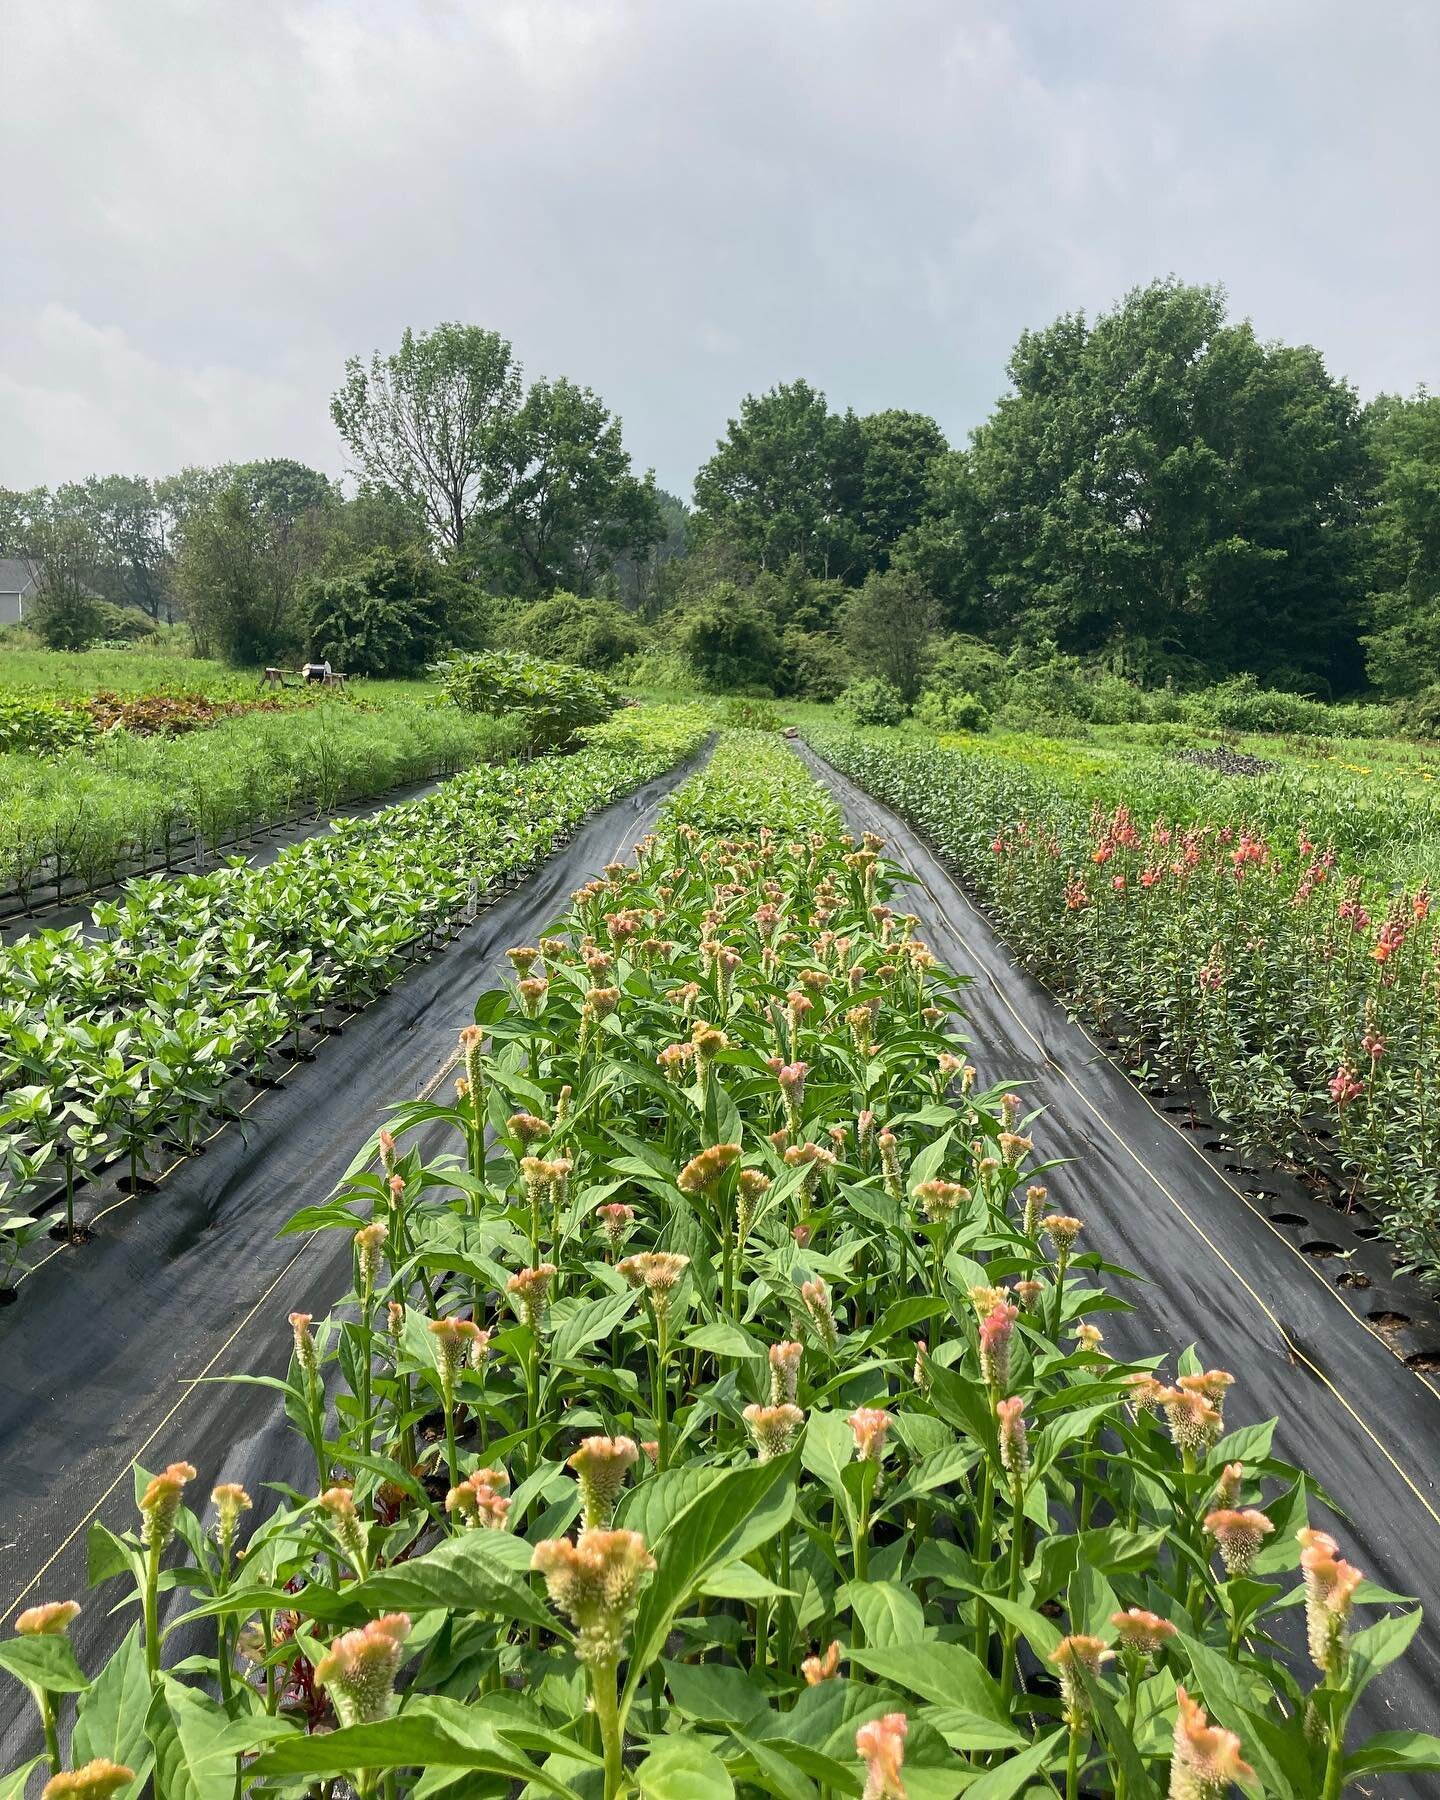 *UPDATE* 💥Thurs July 22nd, we&rsquo;re doing a little MOFGA tour here at the farm from 5-7pm. A few spots just opened up, so send me a message if you&rsquo;re interested in joining.💥Here is a photo that makes our farm appear very cute and organized